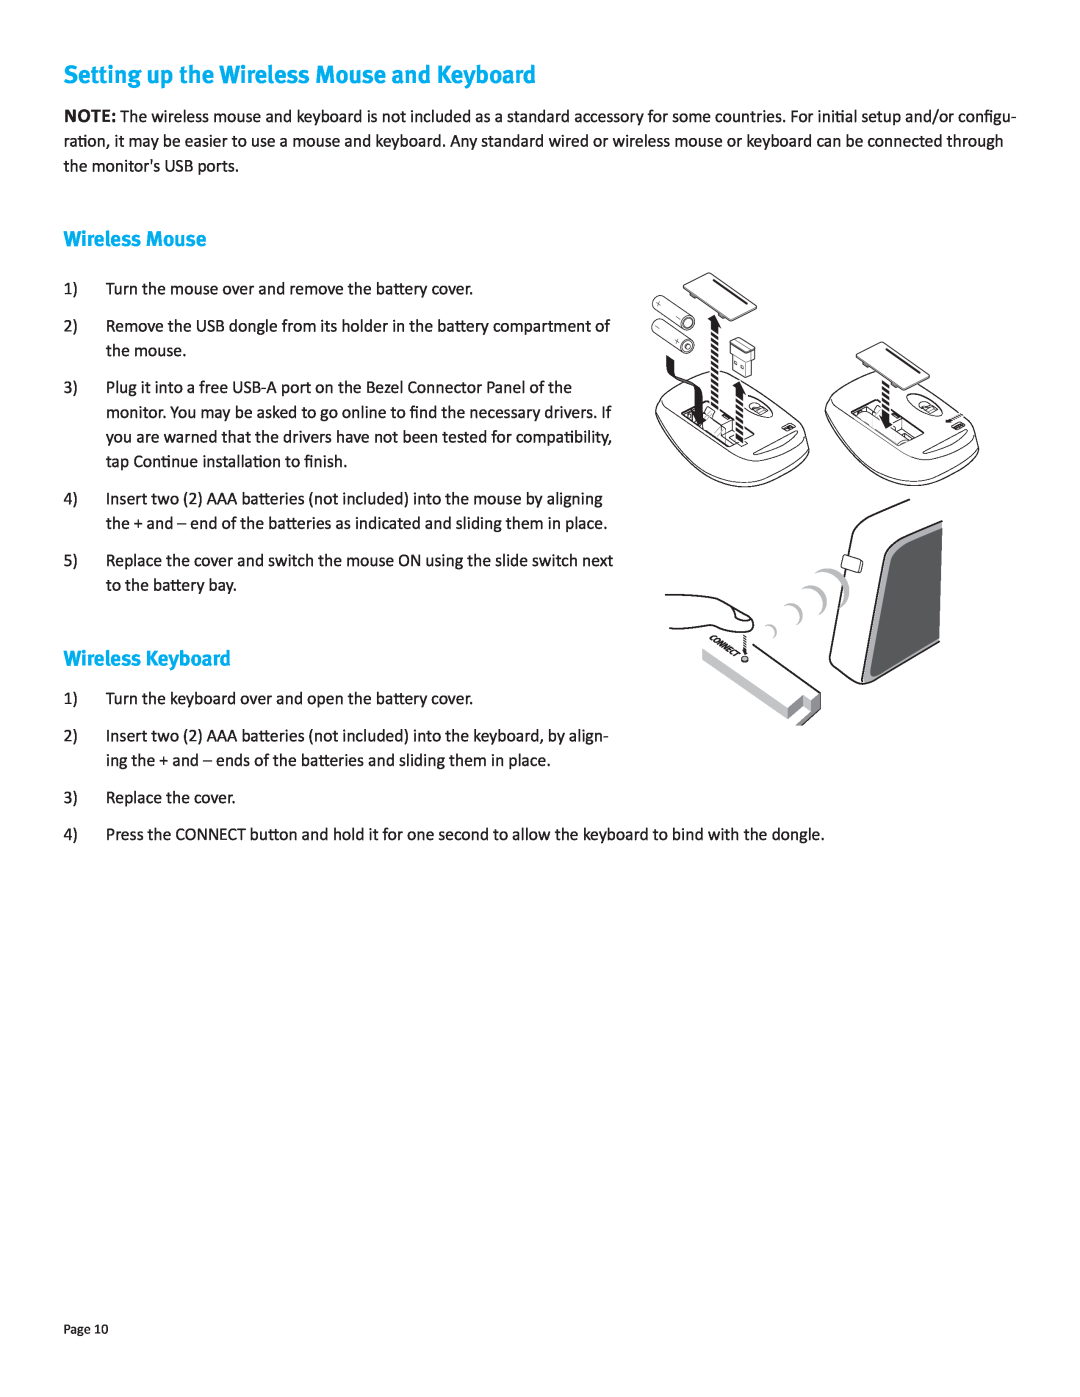 InFocus INF7011 manual Setting up the Wireless Mouse and Keyboard, Wireless Keyboard 